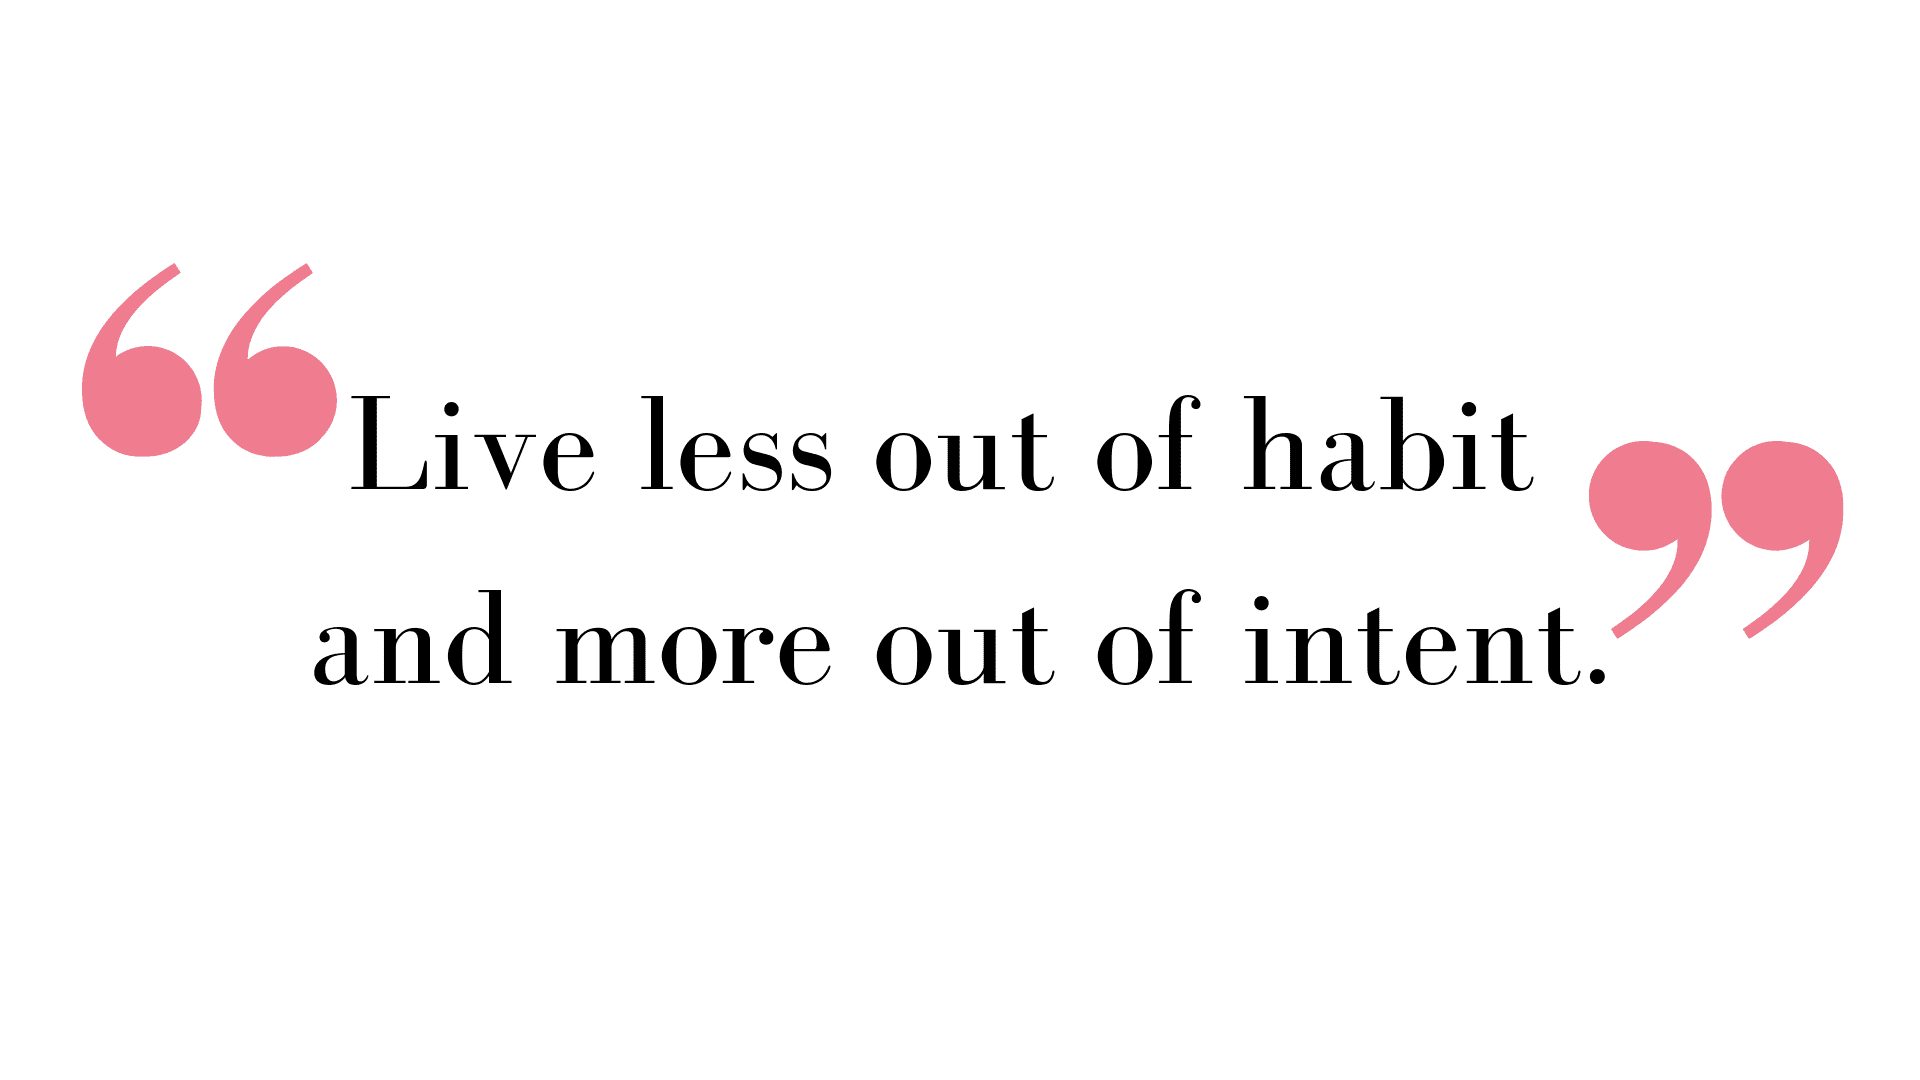 Live less out of habit and more out of intent.